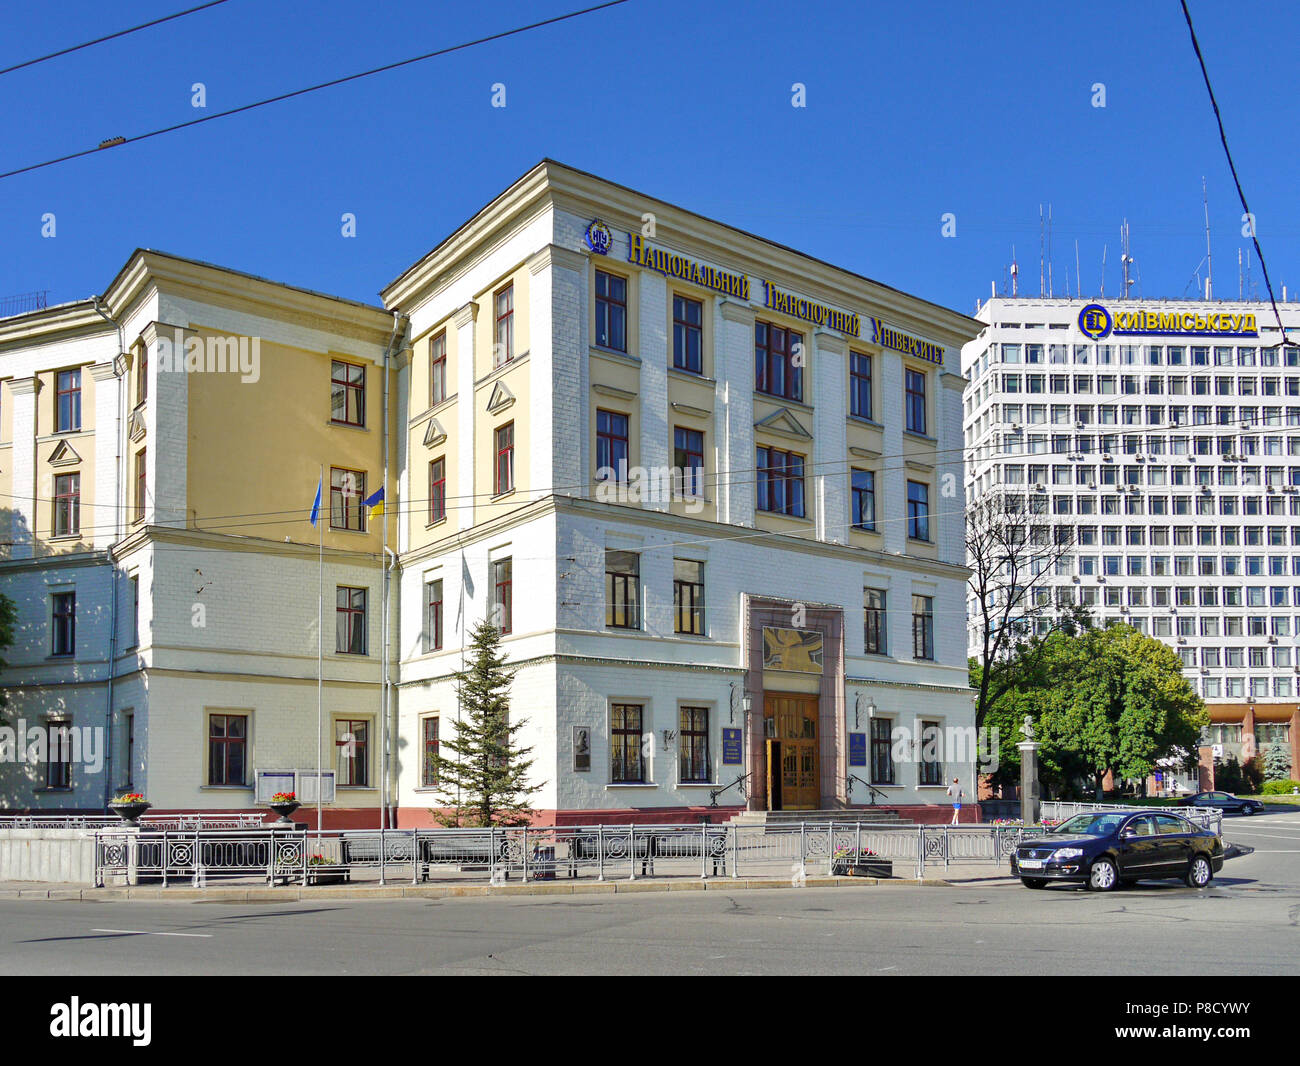 The building of the university on a city street with flagpoles standing next to it with fluttering flags and passing by the car on the road. . For you Stock Photo